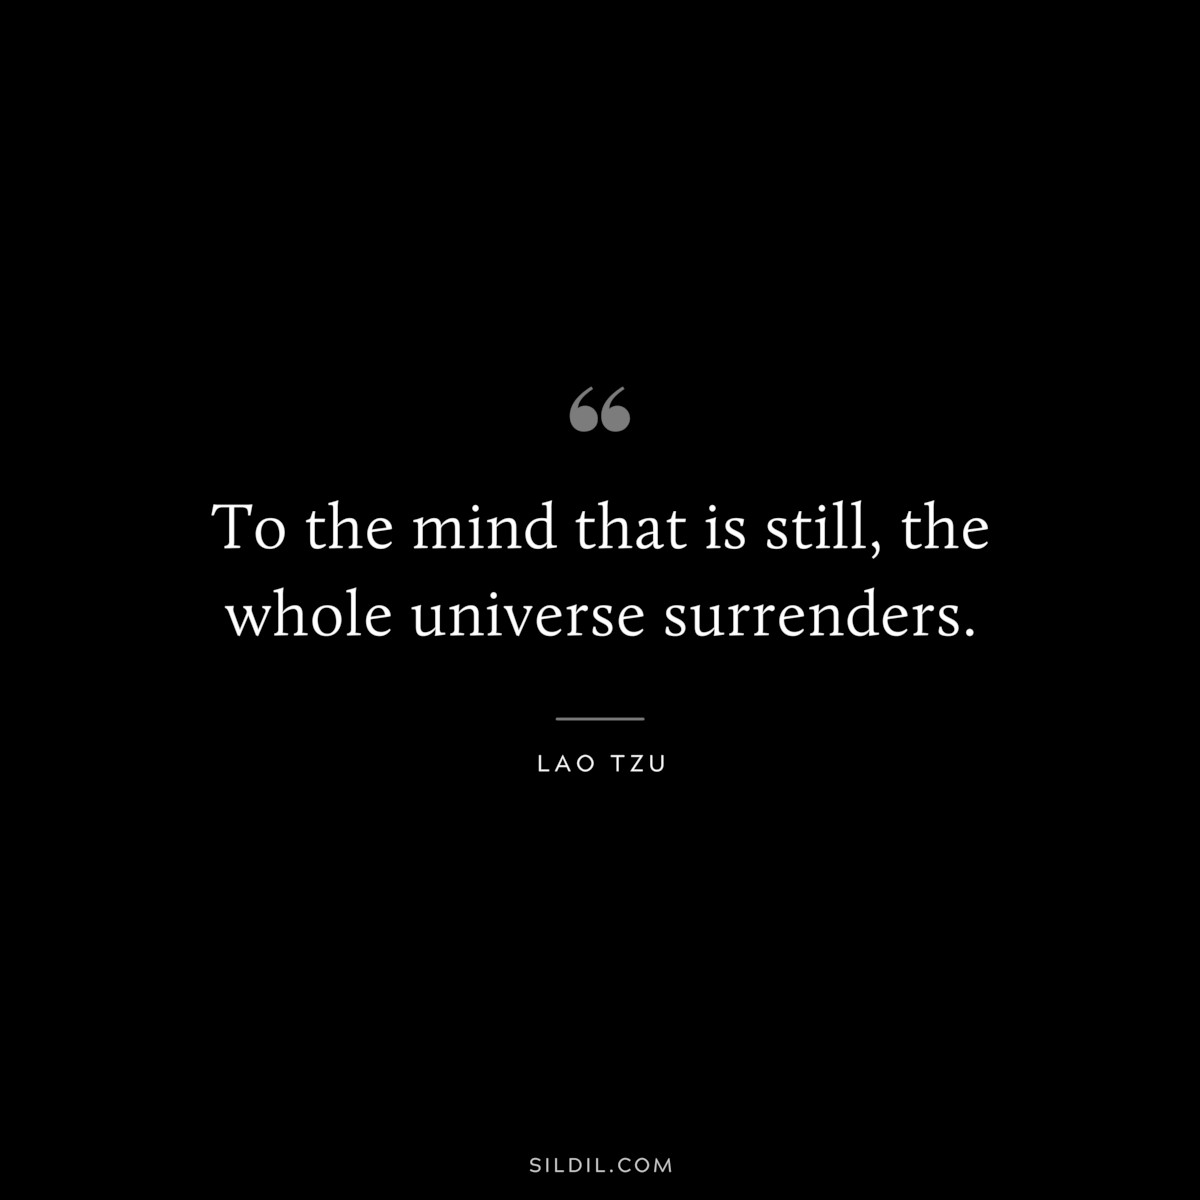 To the mind that is still, the whole universe surrenders. ― Lao Tzu